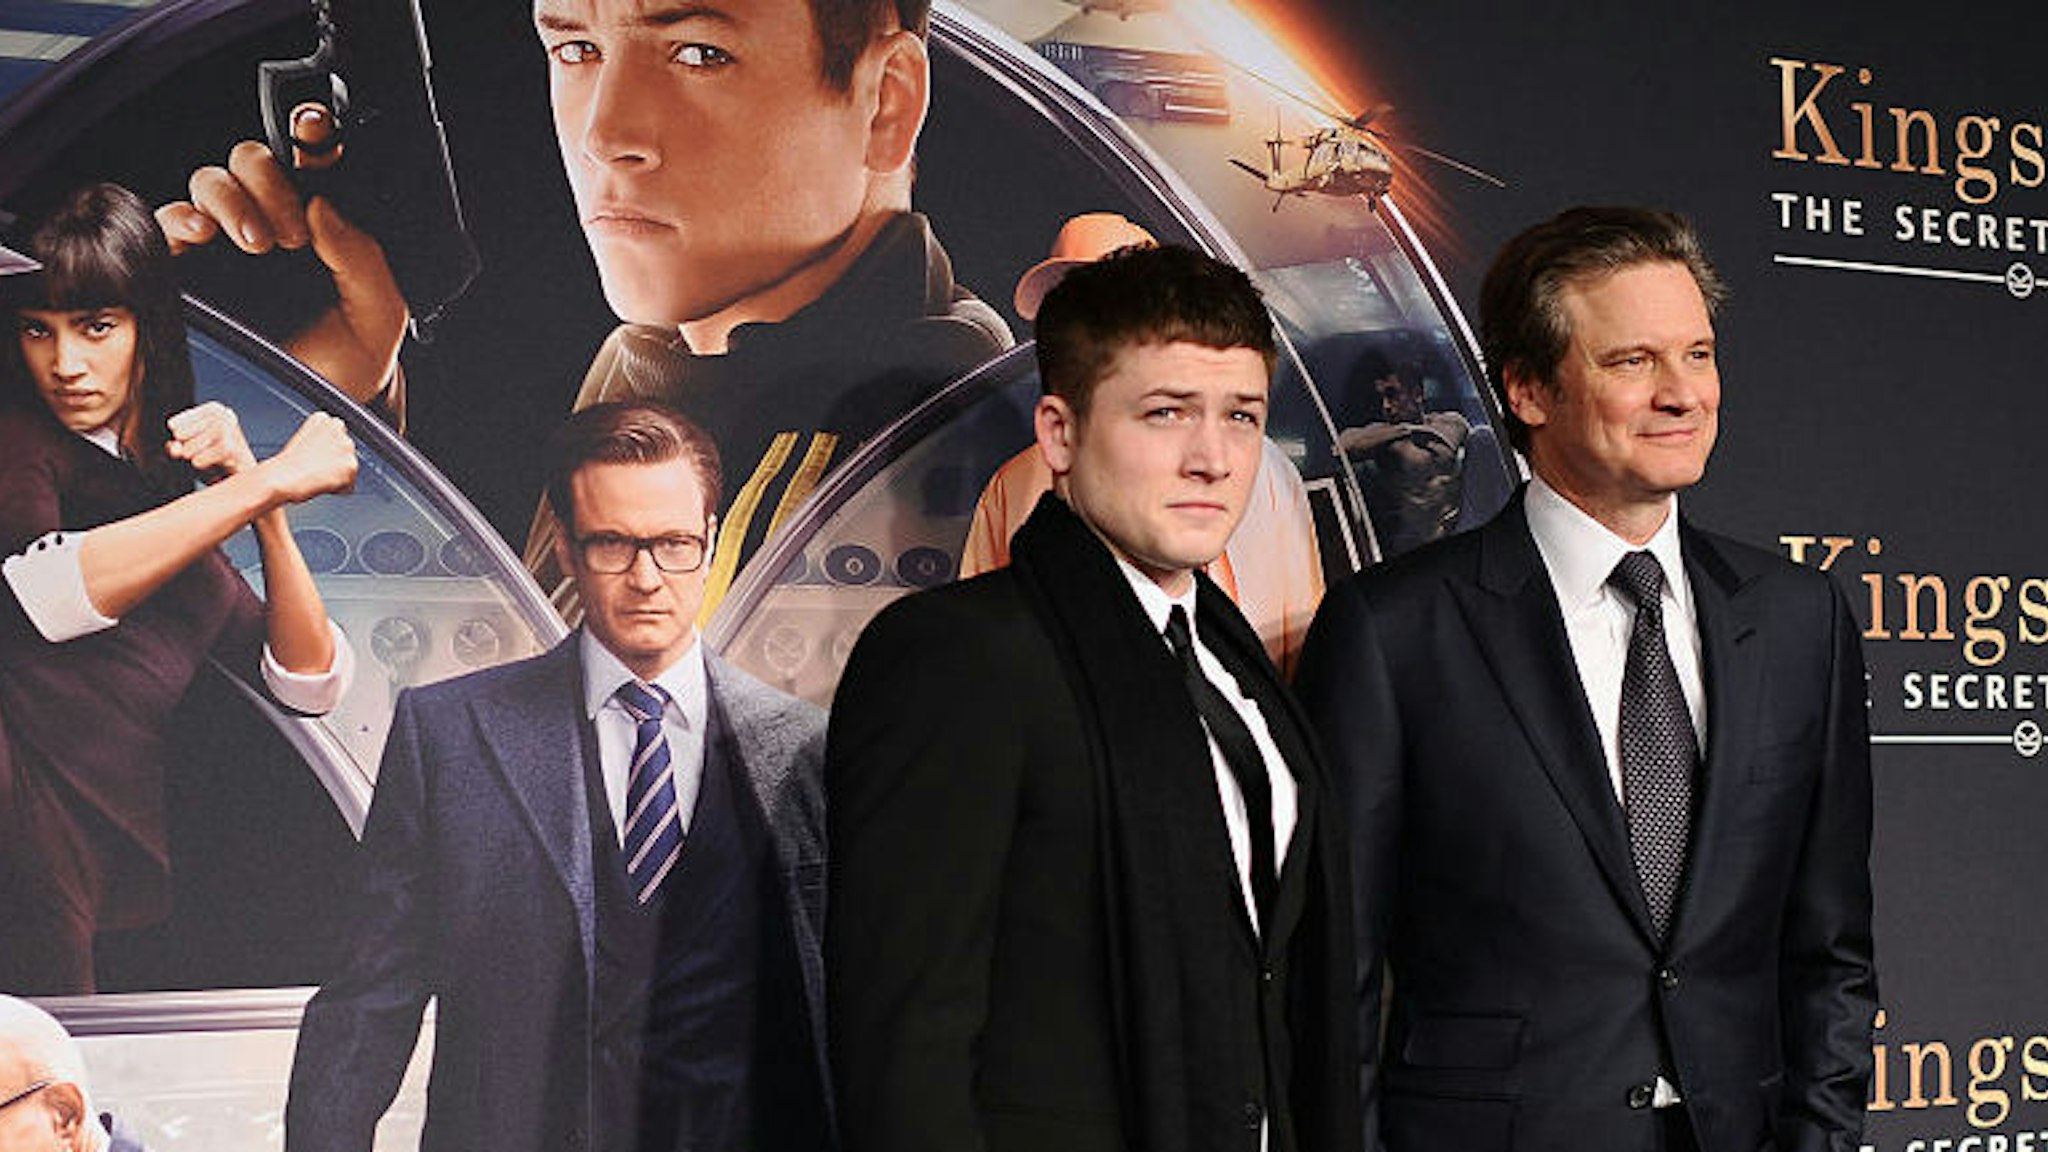 Taron Egerton (L) and Colin Firth attend the "Kingsman: The Secret Service" New York premiere at SVA Theater on February 9, 2015 in New York City.